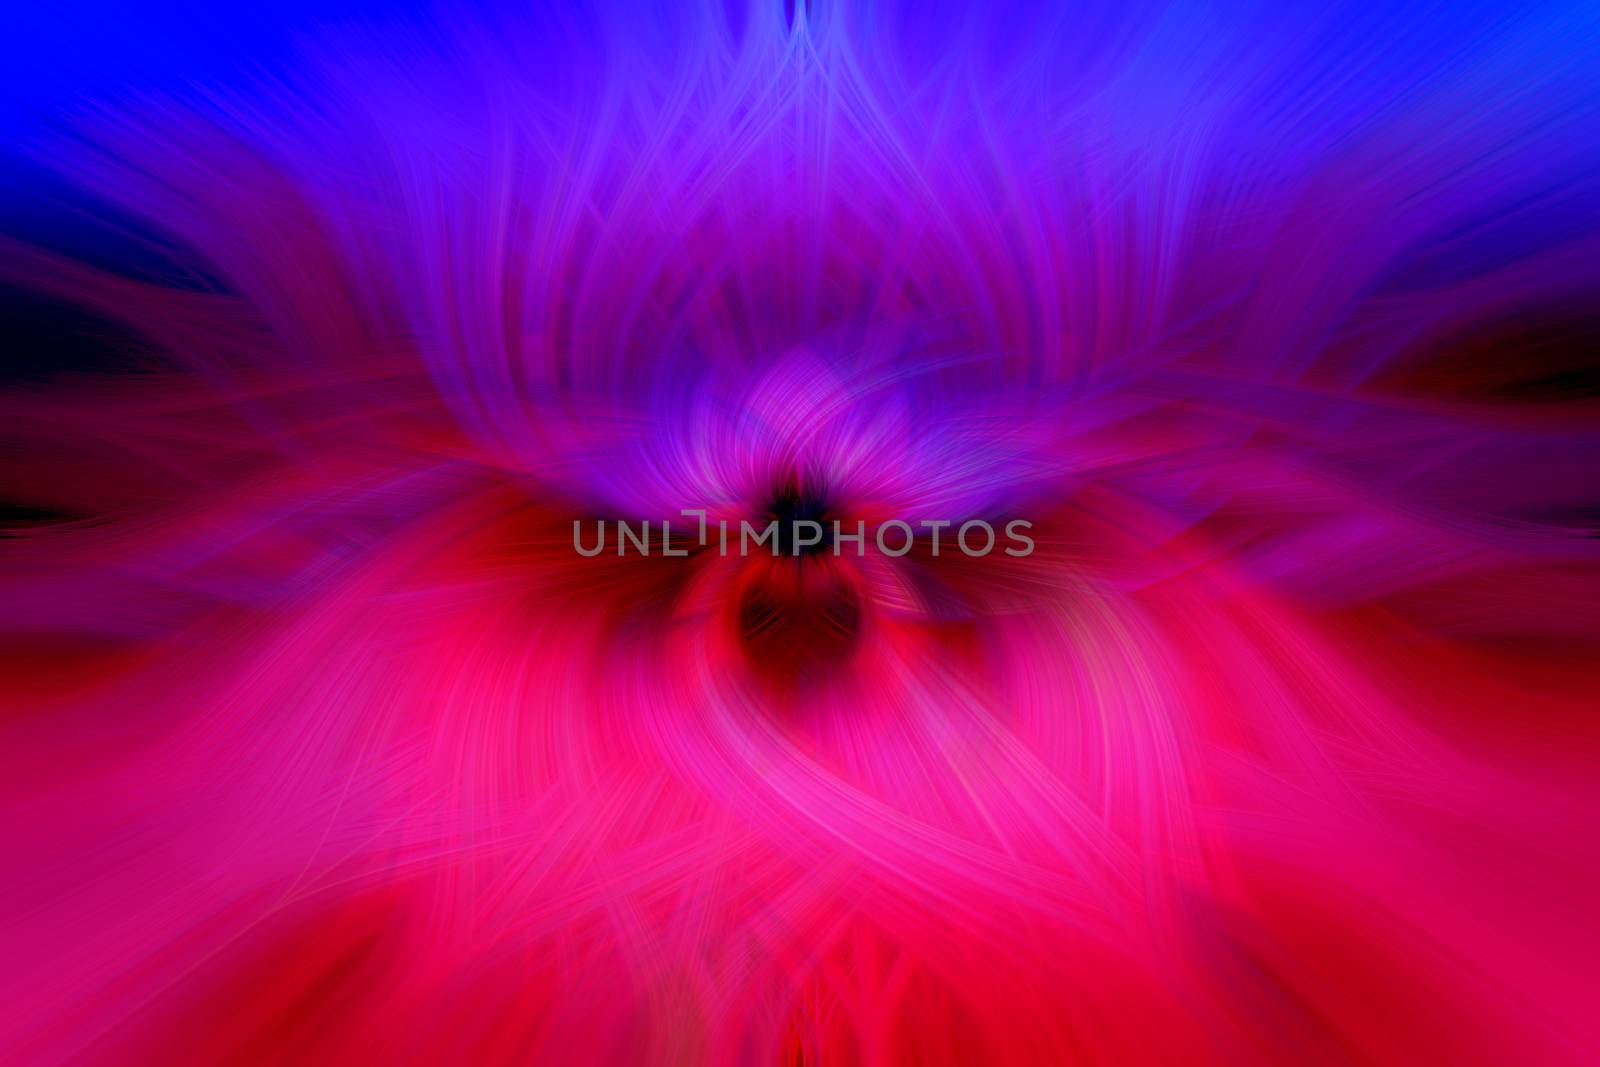 Beautiful abstract intertwined 3d fibers forming an ornament made of various symmetrical shapes. Pink, purple, red, and blue colors. Illustration.